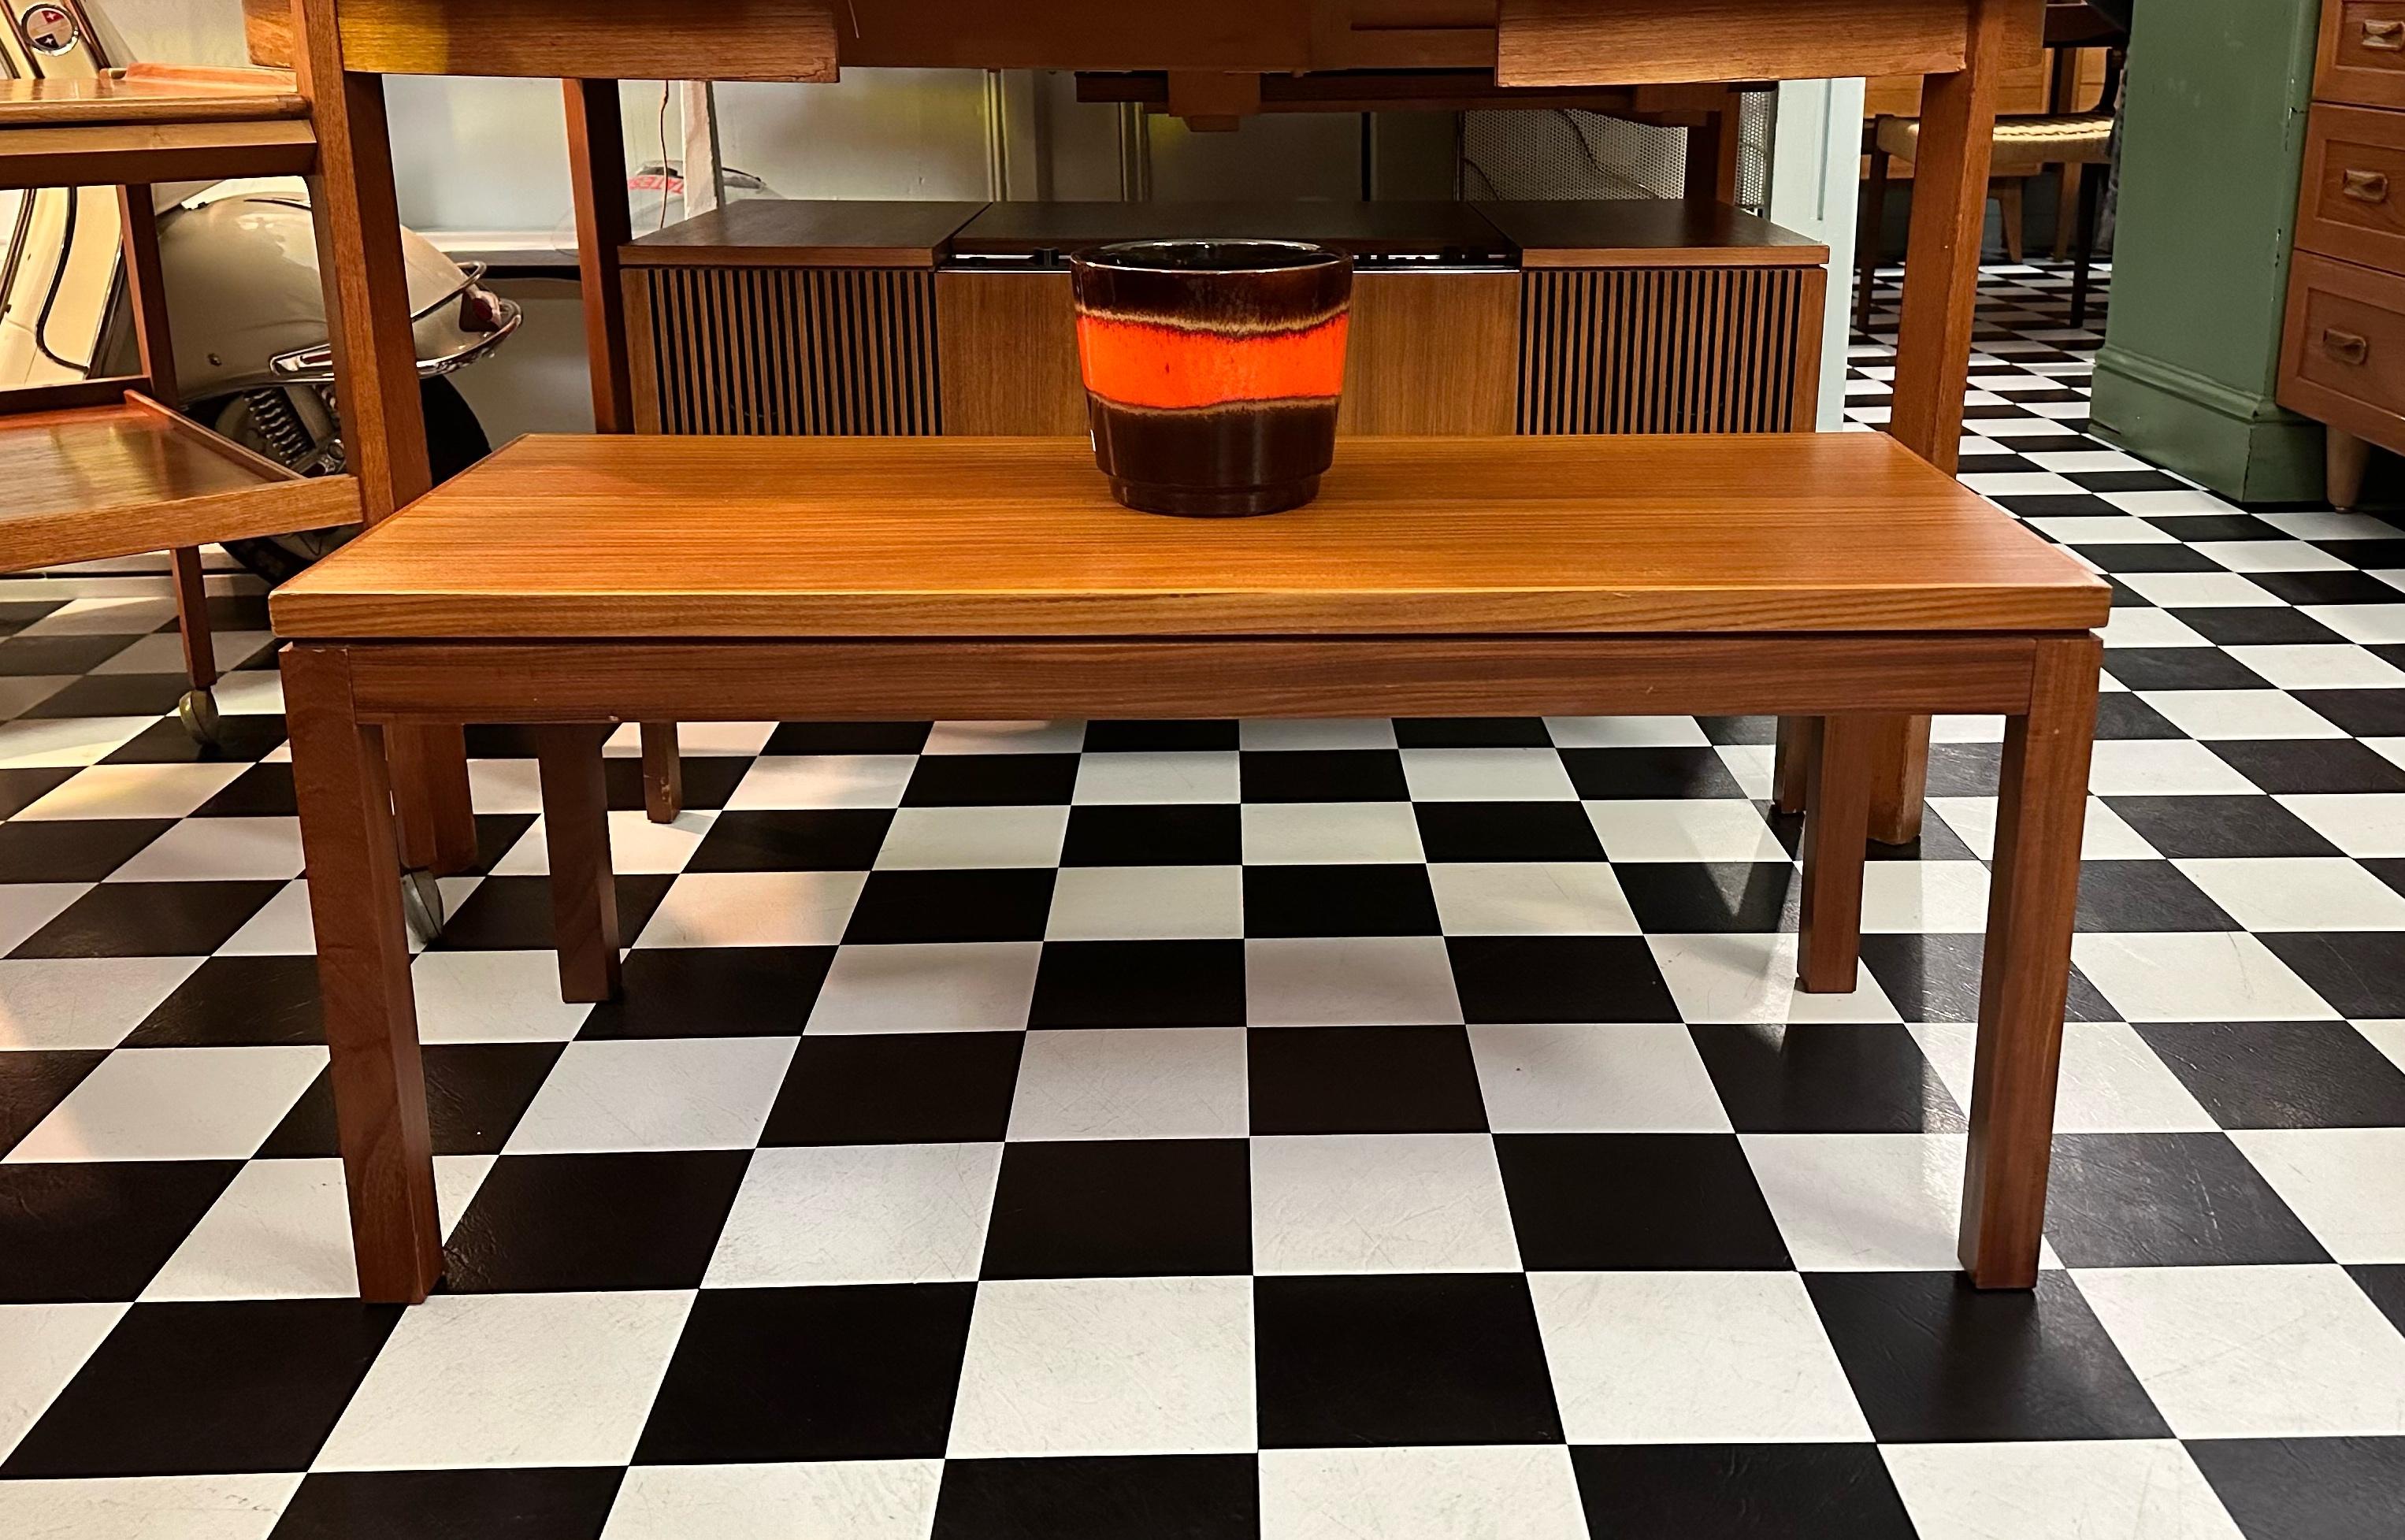 Stunning and unique rectangular coffee table. Beautiful design with lustrous teak grain throughout, clean lines and very stylish legs. This piece is a great example of mid-century craftsmanship, it is very well made.
Excellent vintage condition with